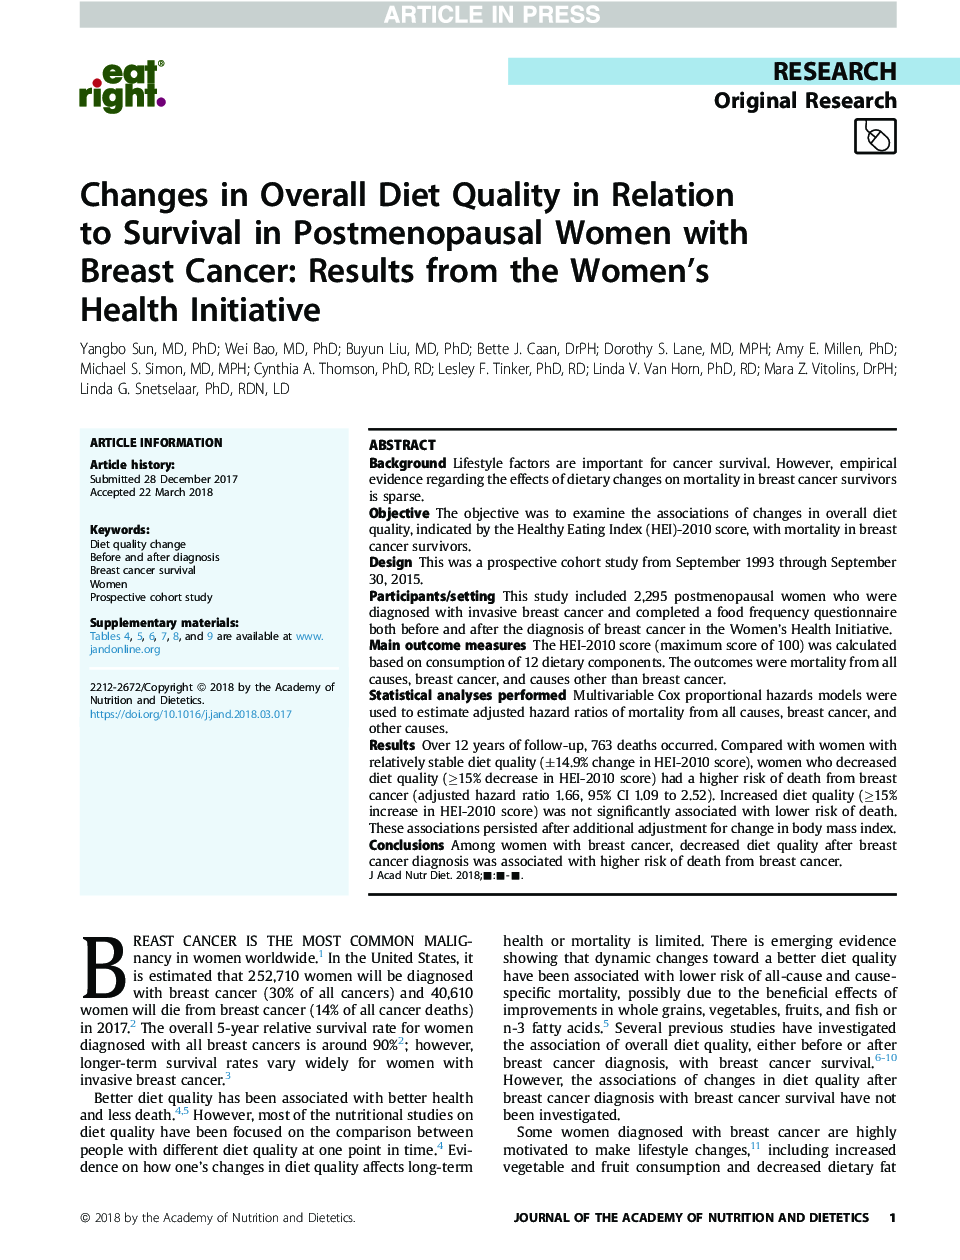 Changes in Overall Diet Quality in Relation toÂ Survival in Postmenopausal Women with BreastÂ Cancer: Results from the Women's HealthÂ Initiative